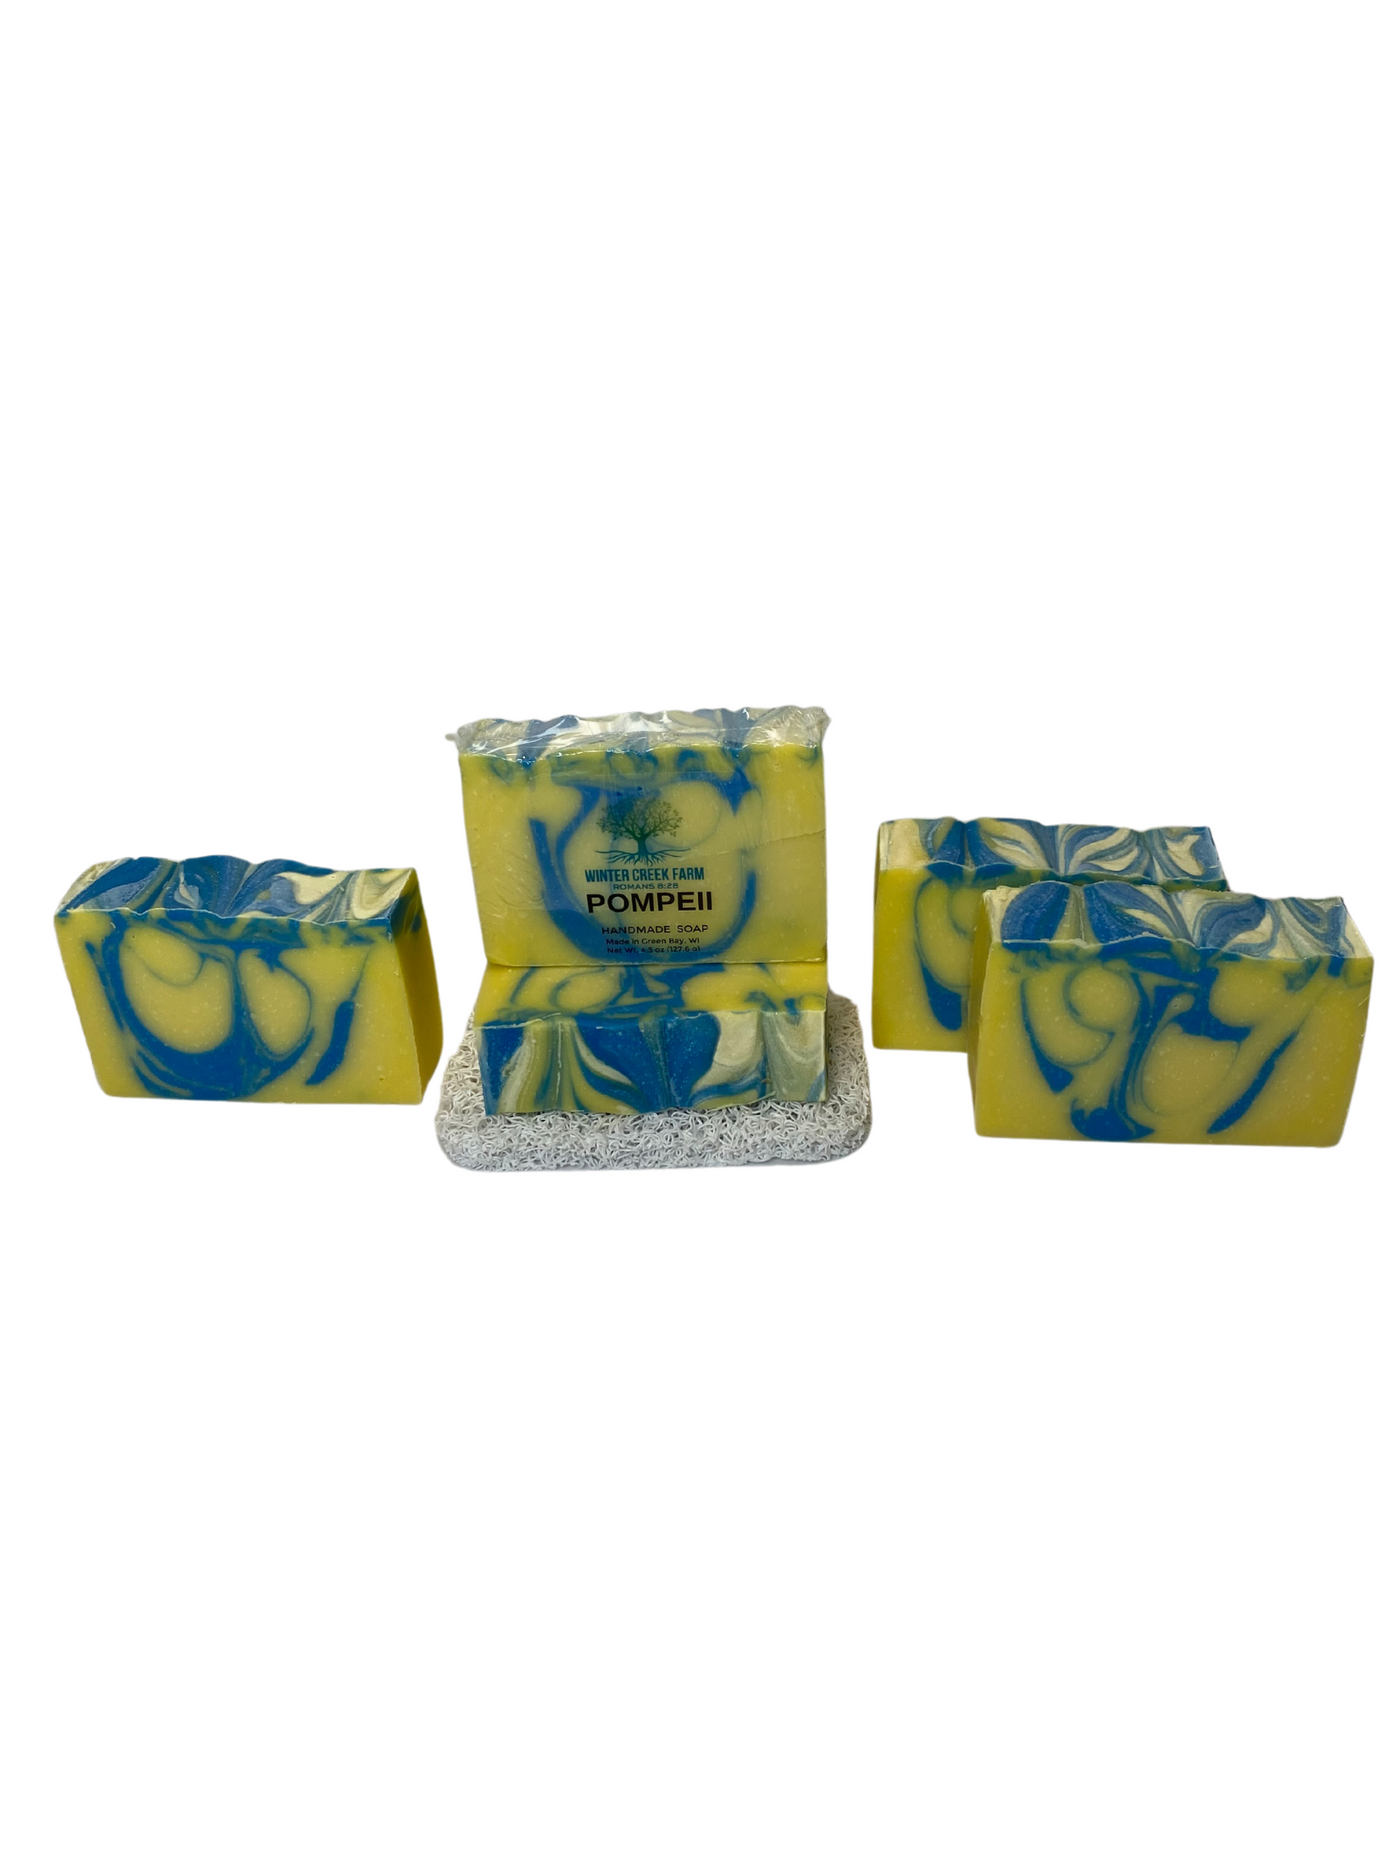 Pompeii Soap | Natural Oils and Butters | Cold Process Soap | Soap for Him | Gift for her | Gift for Self | Handmade Soap